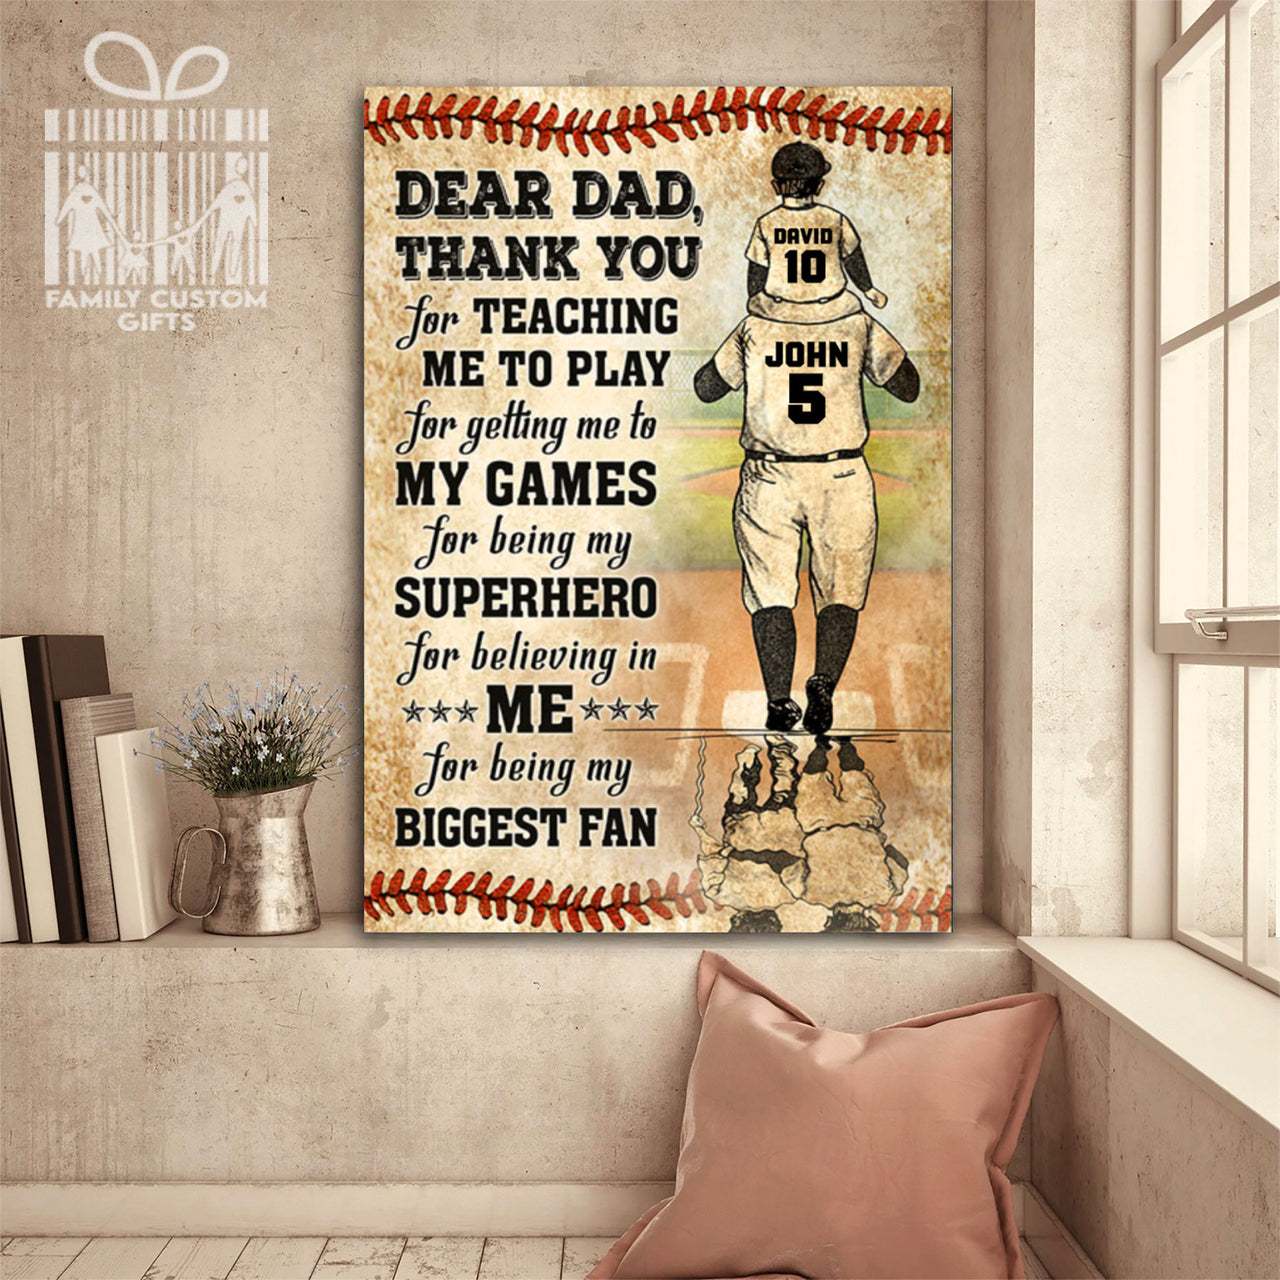 Custom Canvas Print Wall Art Baseball Dear Dad Thank You For Teaching Me To Play Personalized Canvas Art